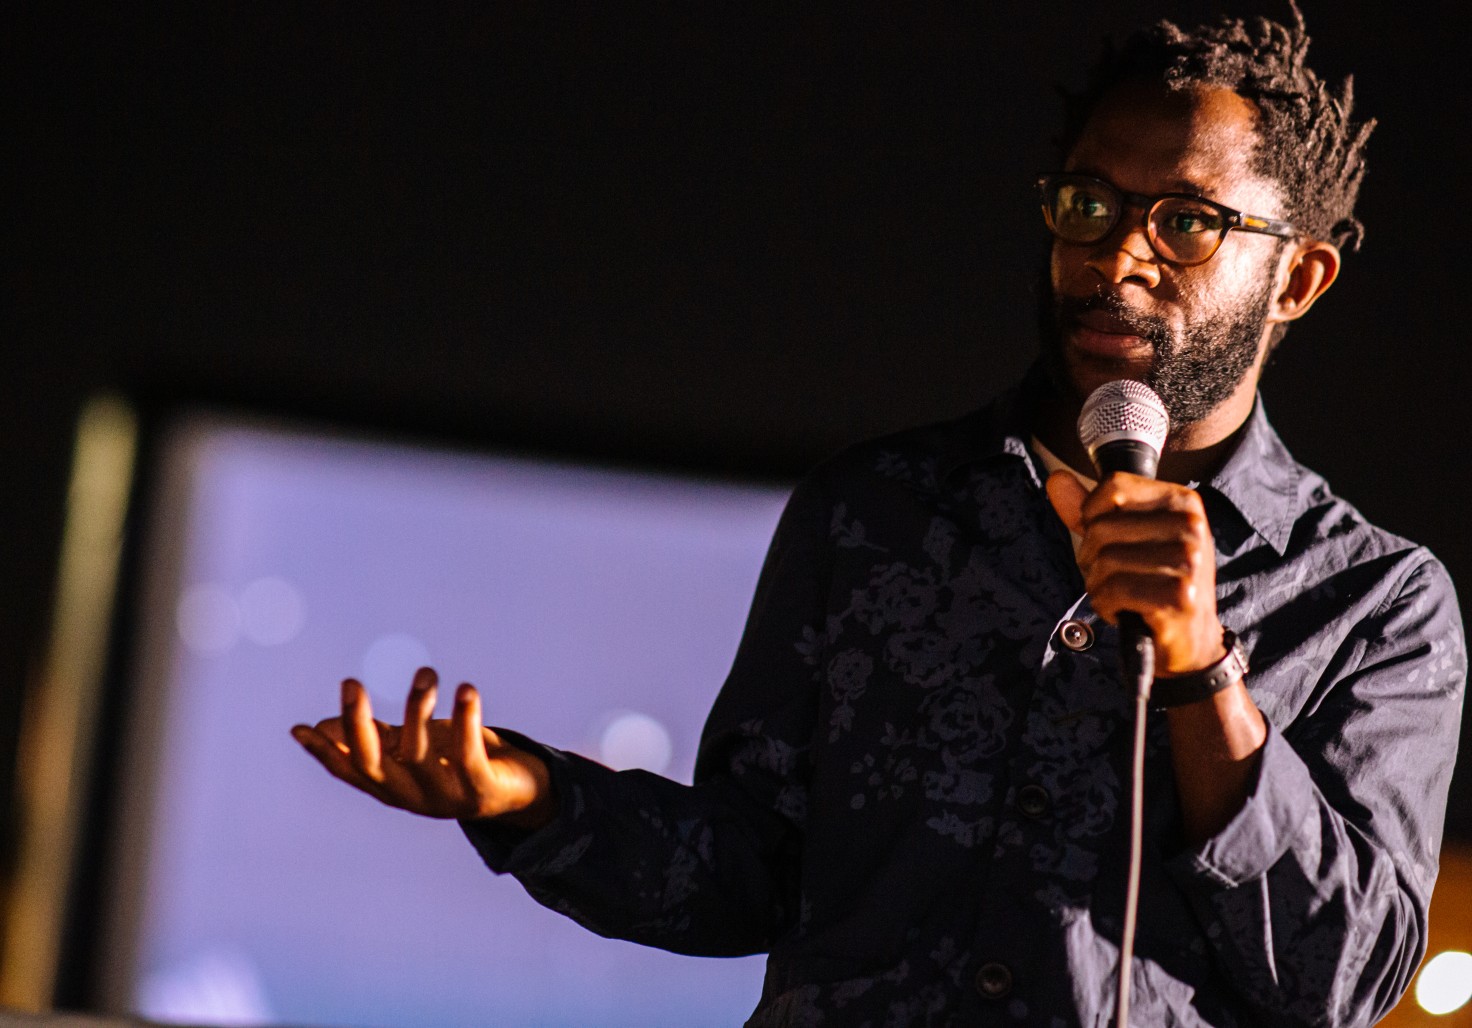 A photo of a Black man speaking into a microphone.